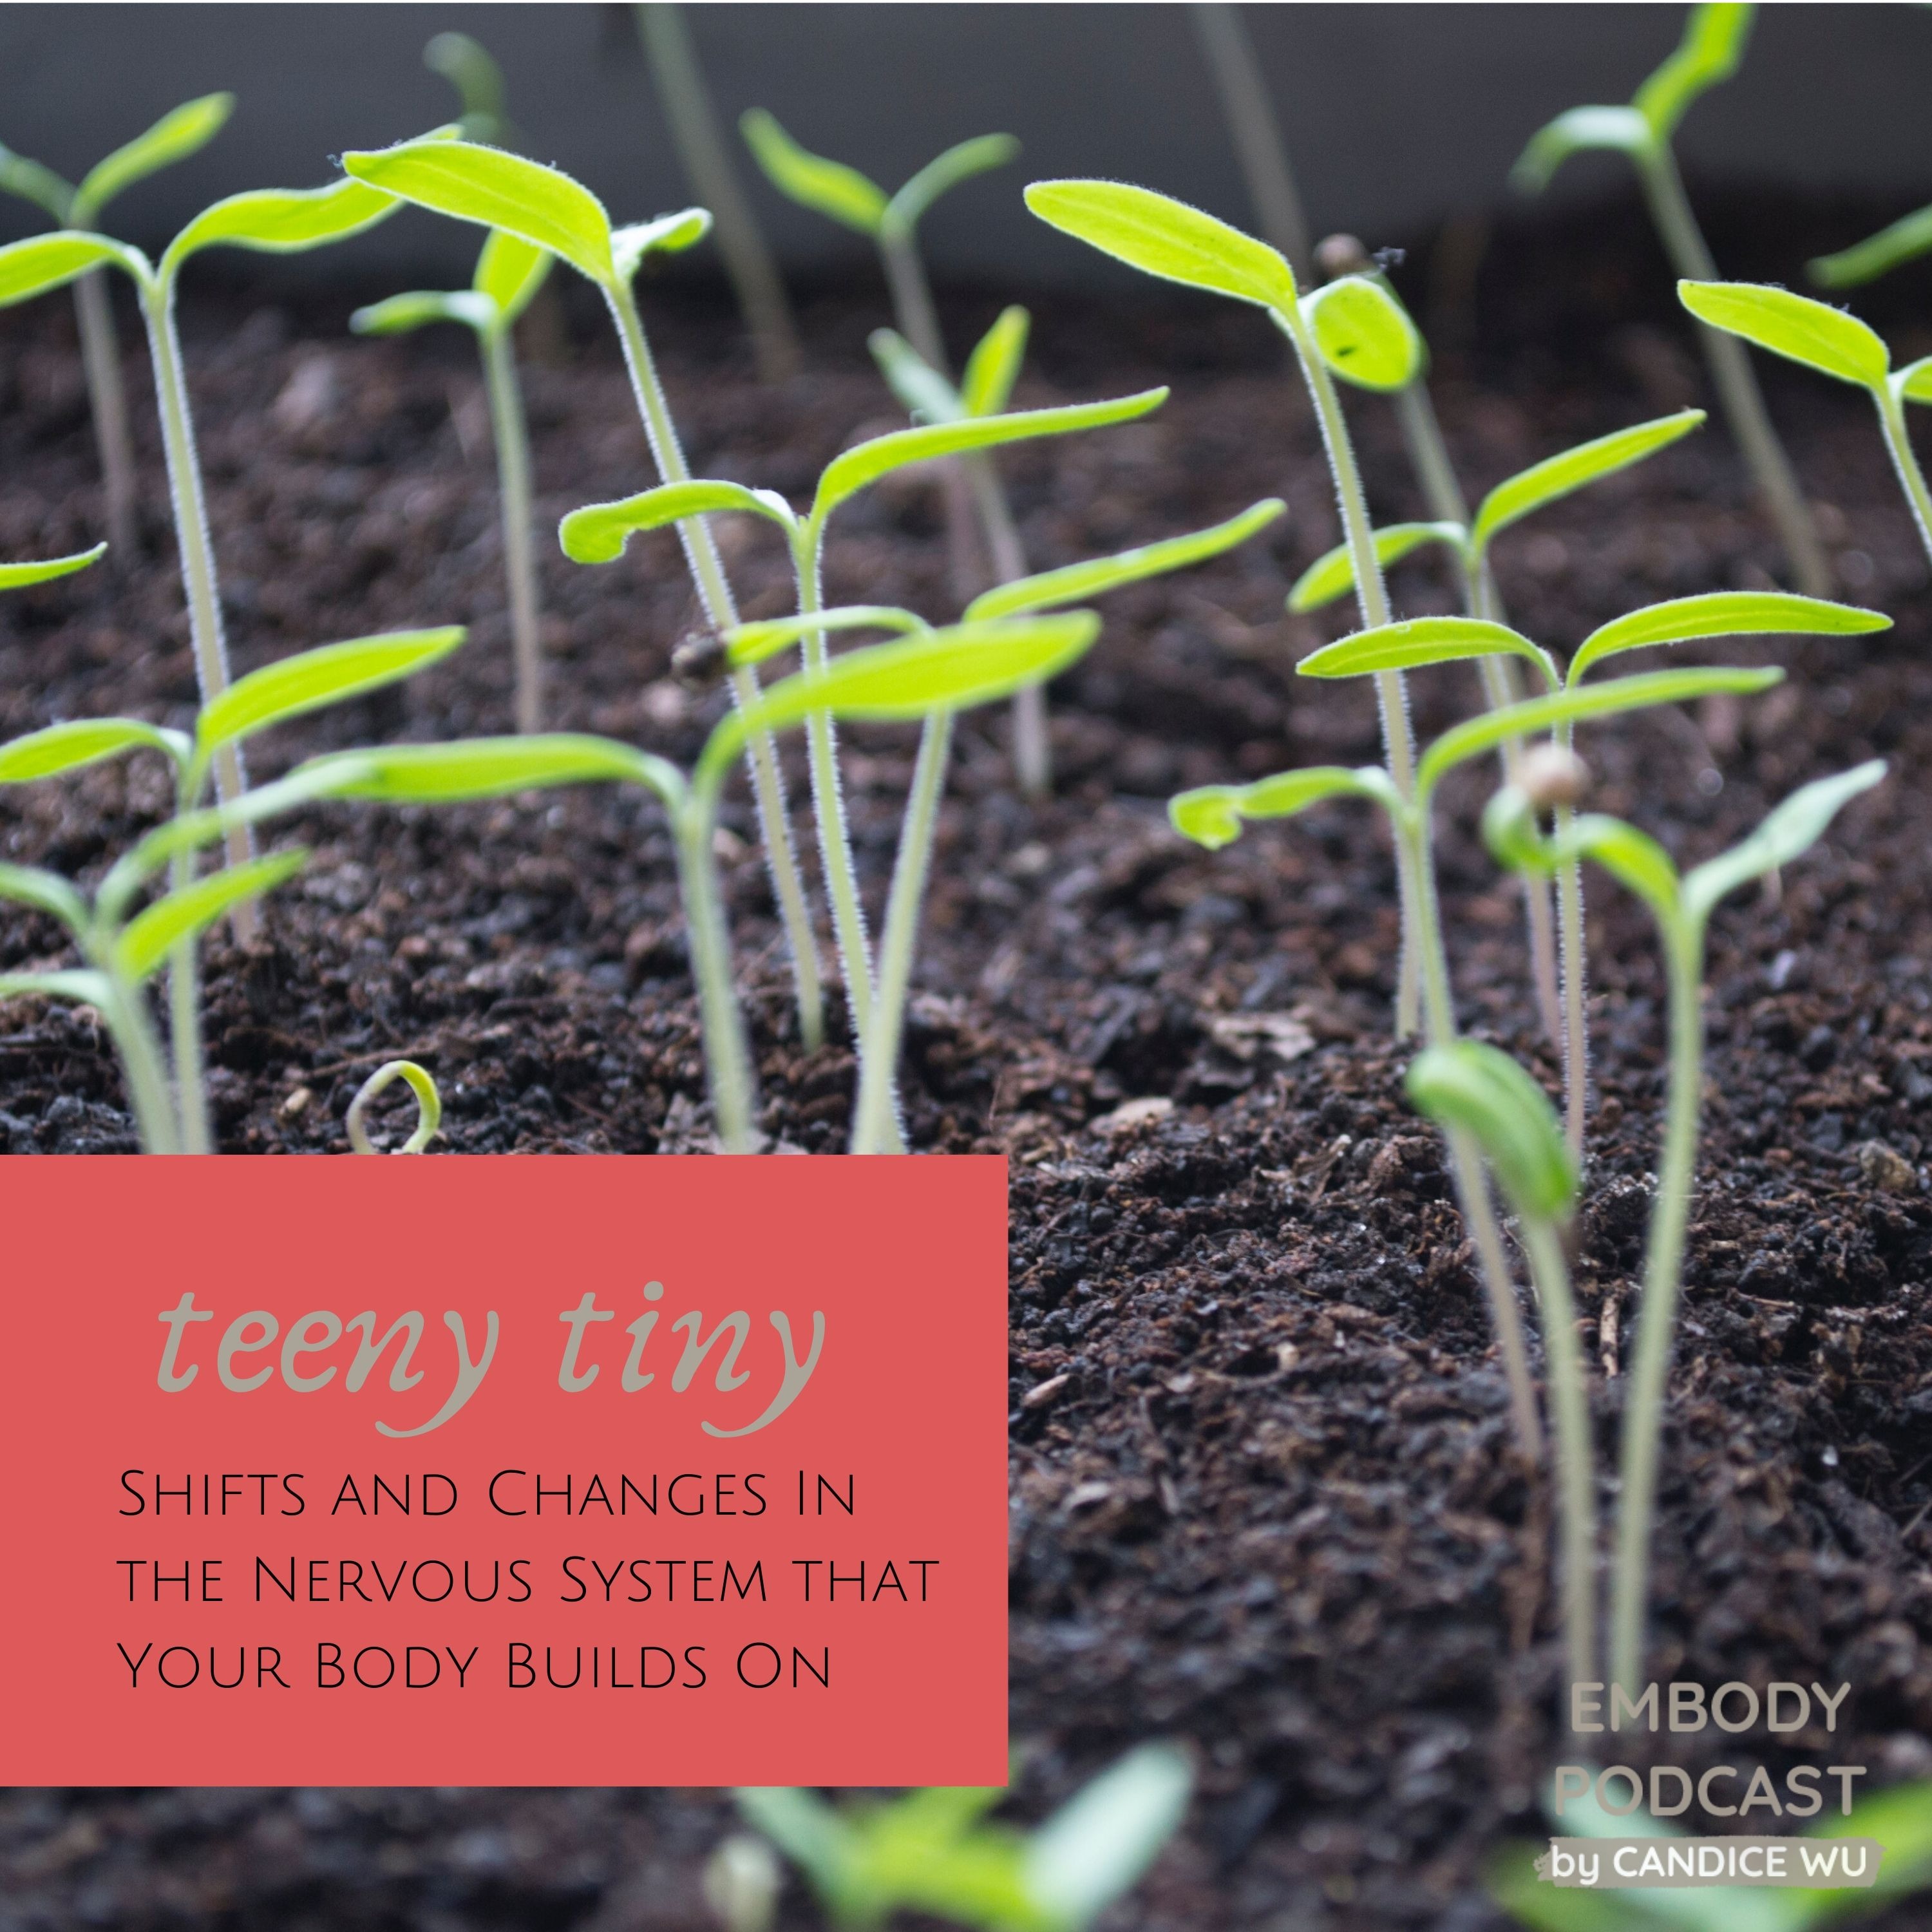 94: The Teeny Tiny Shifts and Changes in the Nervous System That Your Body Builds On